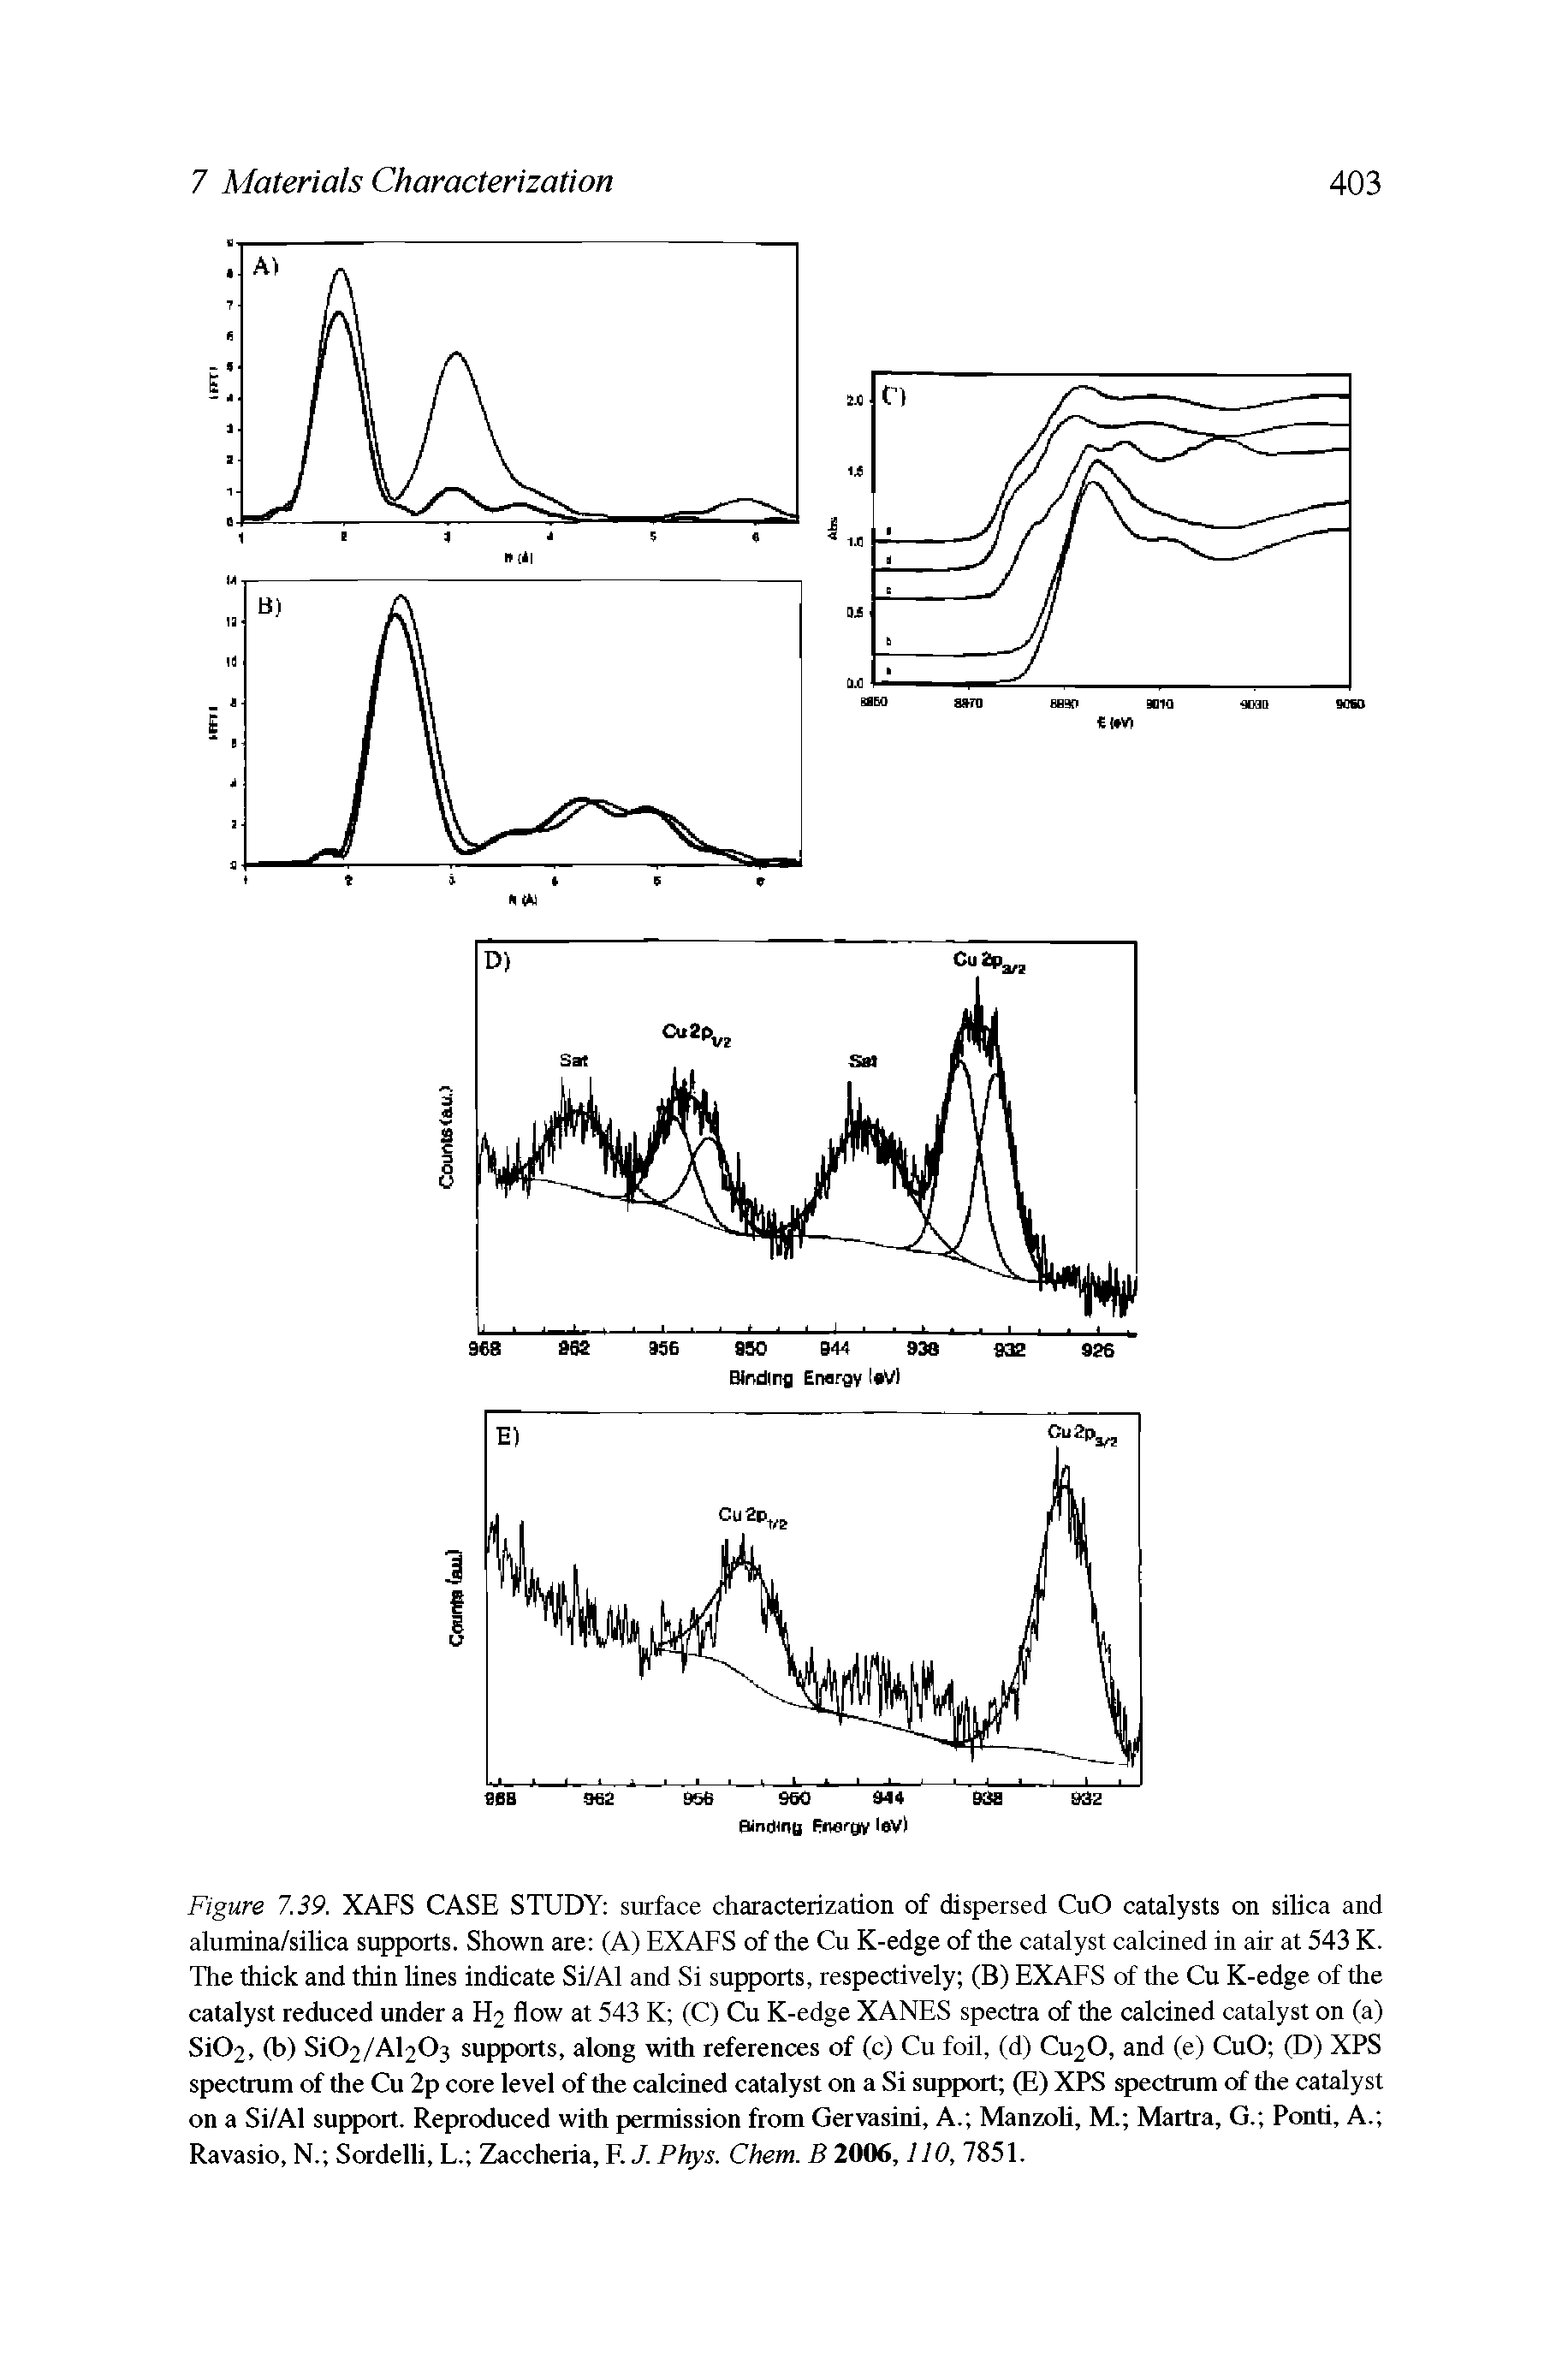 Figure 7.39. XAFS CASE STUDY surface characterization of dispersed CuO catalysts on silica and alumina/silica supports. Shown are (A) EXAFS of the Cu K-edge of the catalyst calcined in air at 543 K. The thick and thin lines indicate Si/Al and Si supports, respectively (B) EXAFS of the Cu K-edge of the catalyst reduced under a H2 flow at 543 K (C) Cu K-edge XANES spectra of the calcined catalyst on (a) Si02, (b) Si02/Al203 supports, along with references of (c) Cu foil, (d) CU2O, and (e) CuO (D) XPS spectrum of the Cu 2p core level of the calcined catalyst on a Si support (E) XPS spectrum of the catalyst on a Si/Al support. Reproduced with permission from Gervasini, A. ManzoU, M. Martra, G. Ponti, A. Ravasio, N. Sordelli, L. Zaccheria, F. J. Phys. Chem. B 2006,110, 7851.